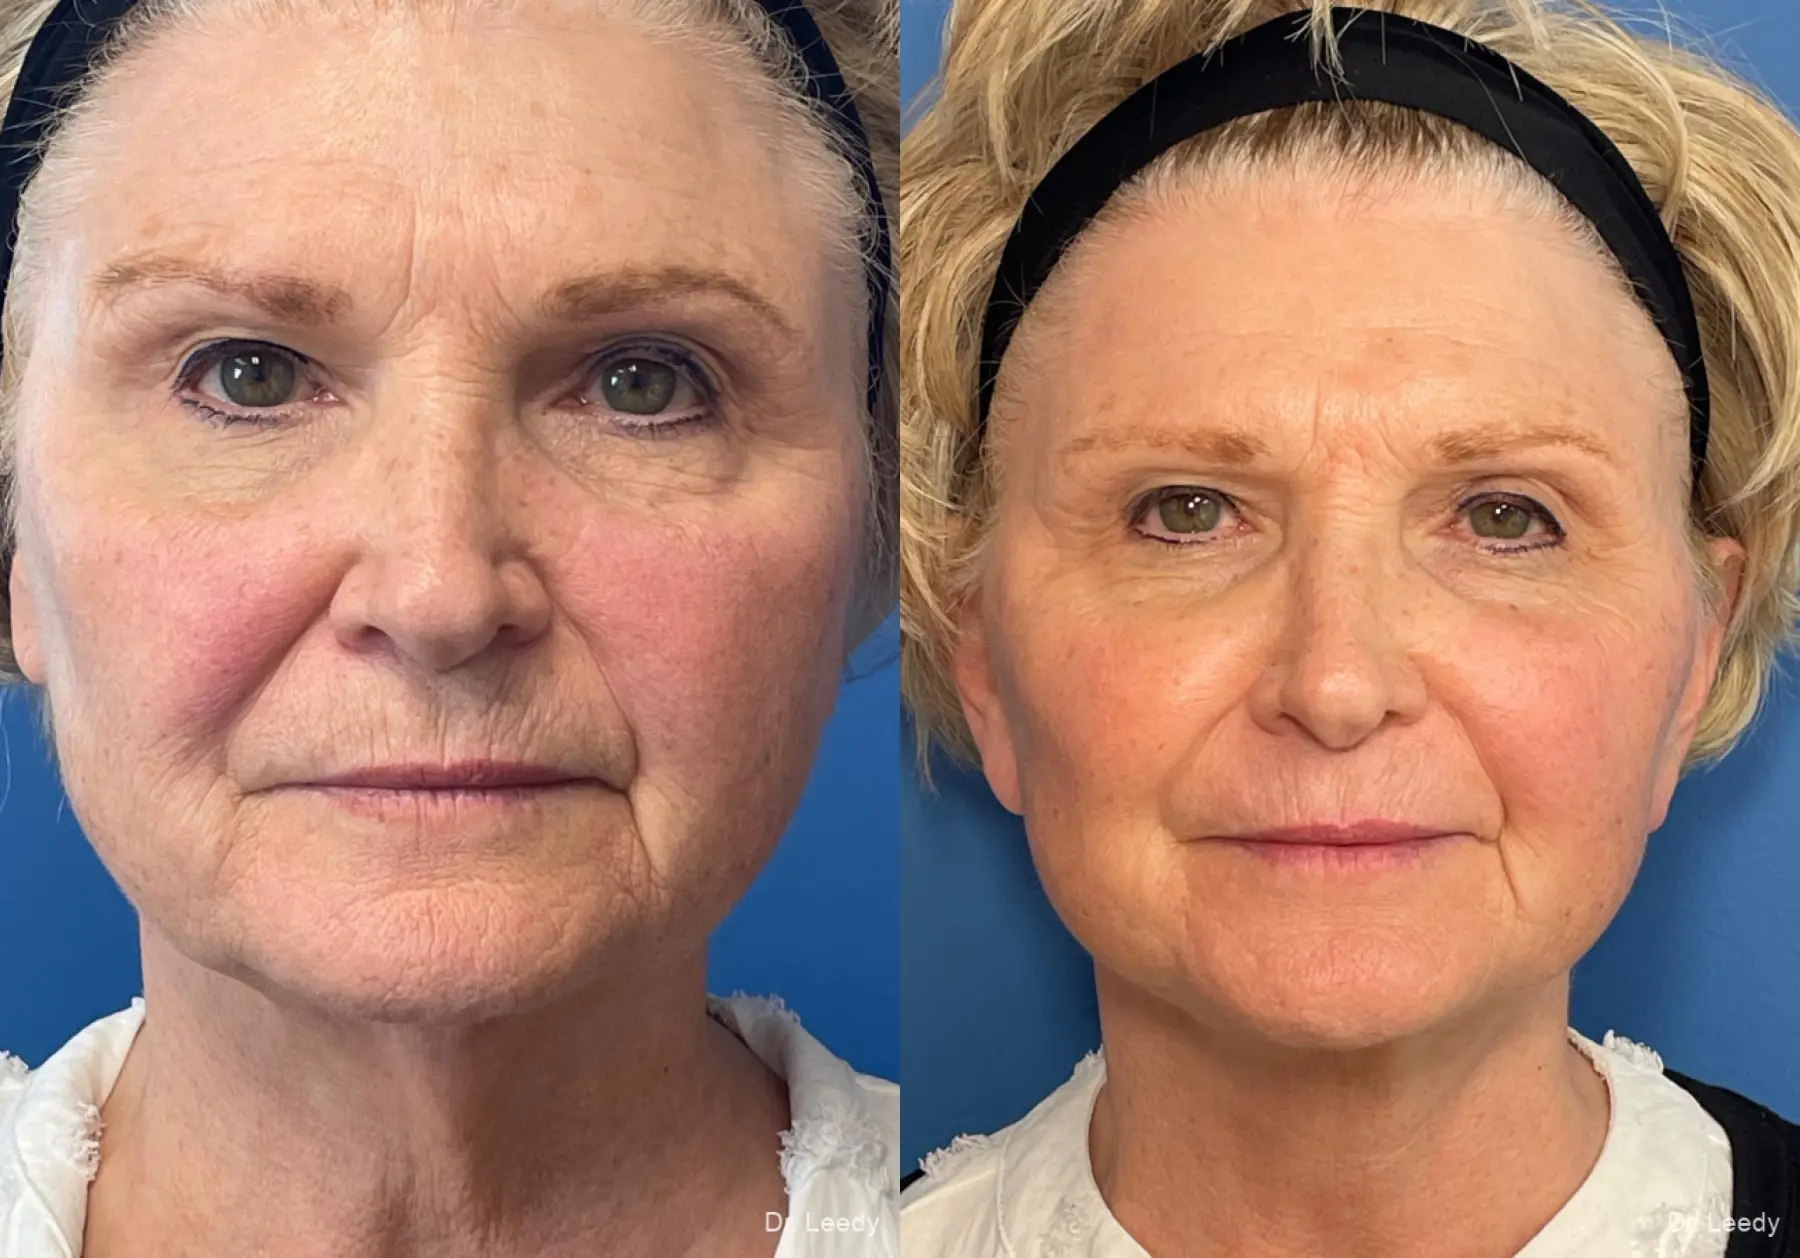 Facelift/Mini Facelift: Patient 1 - Before and After  